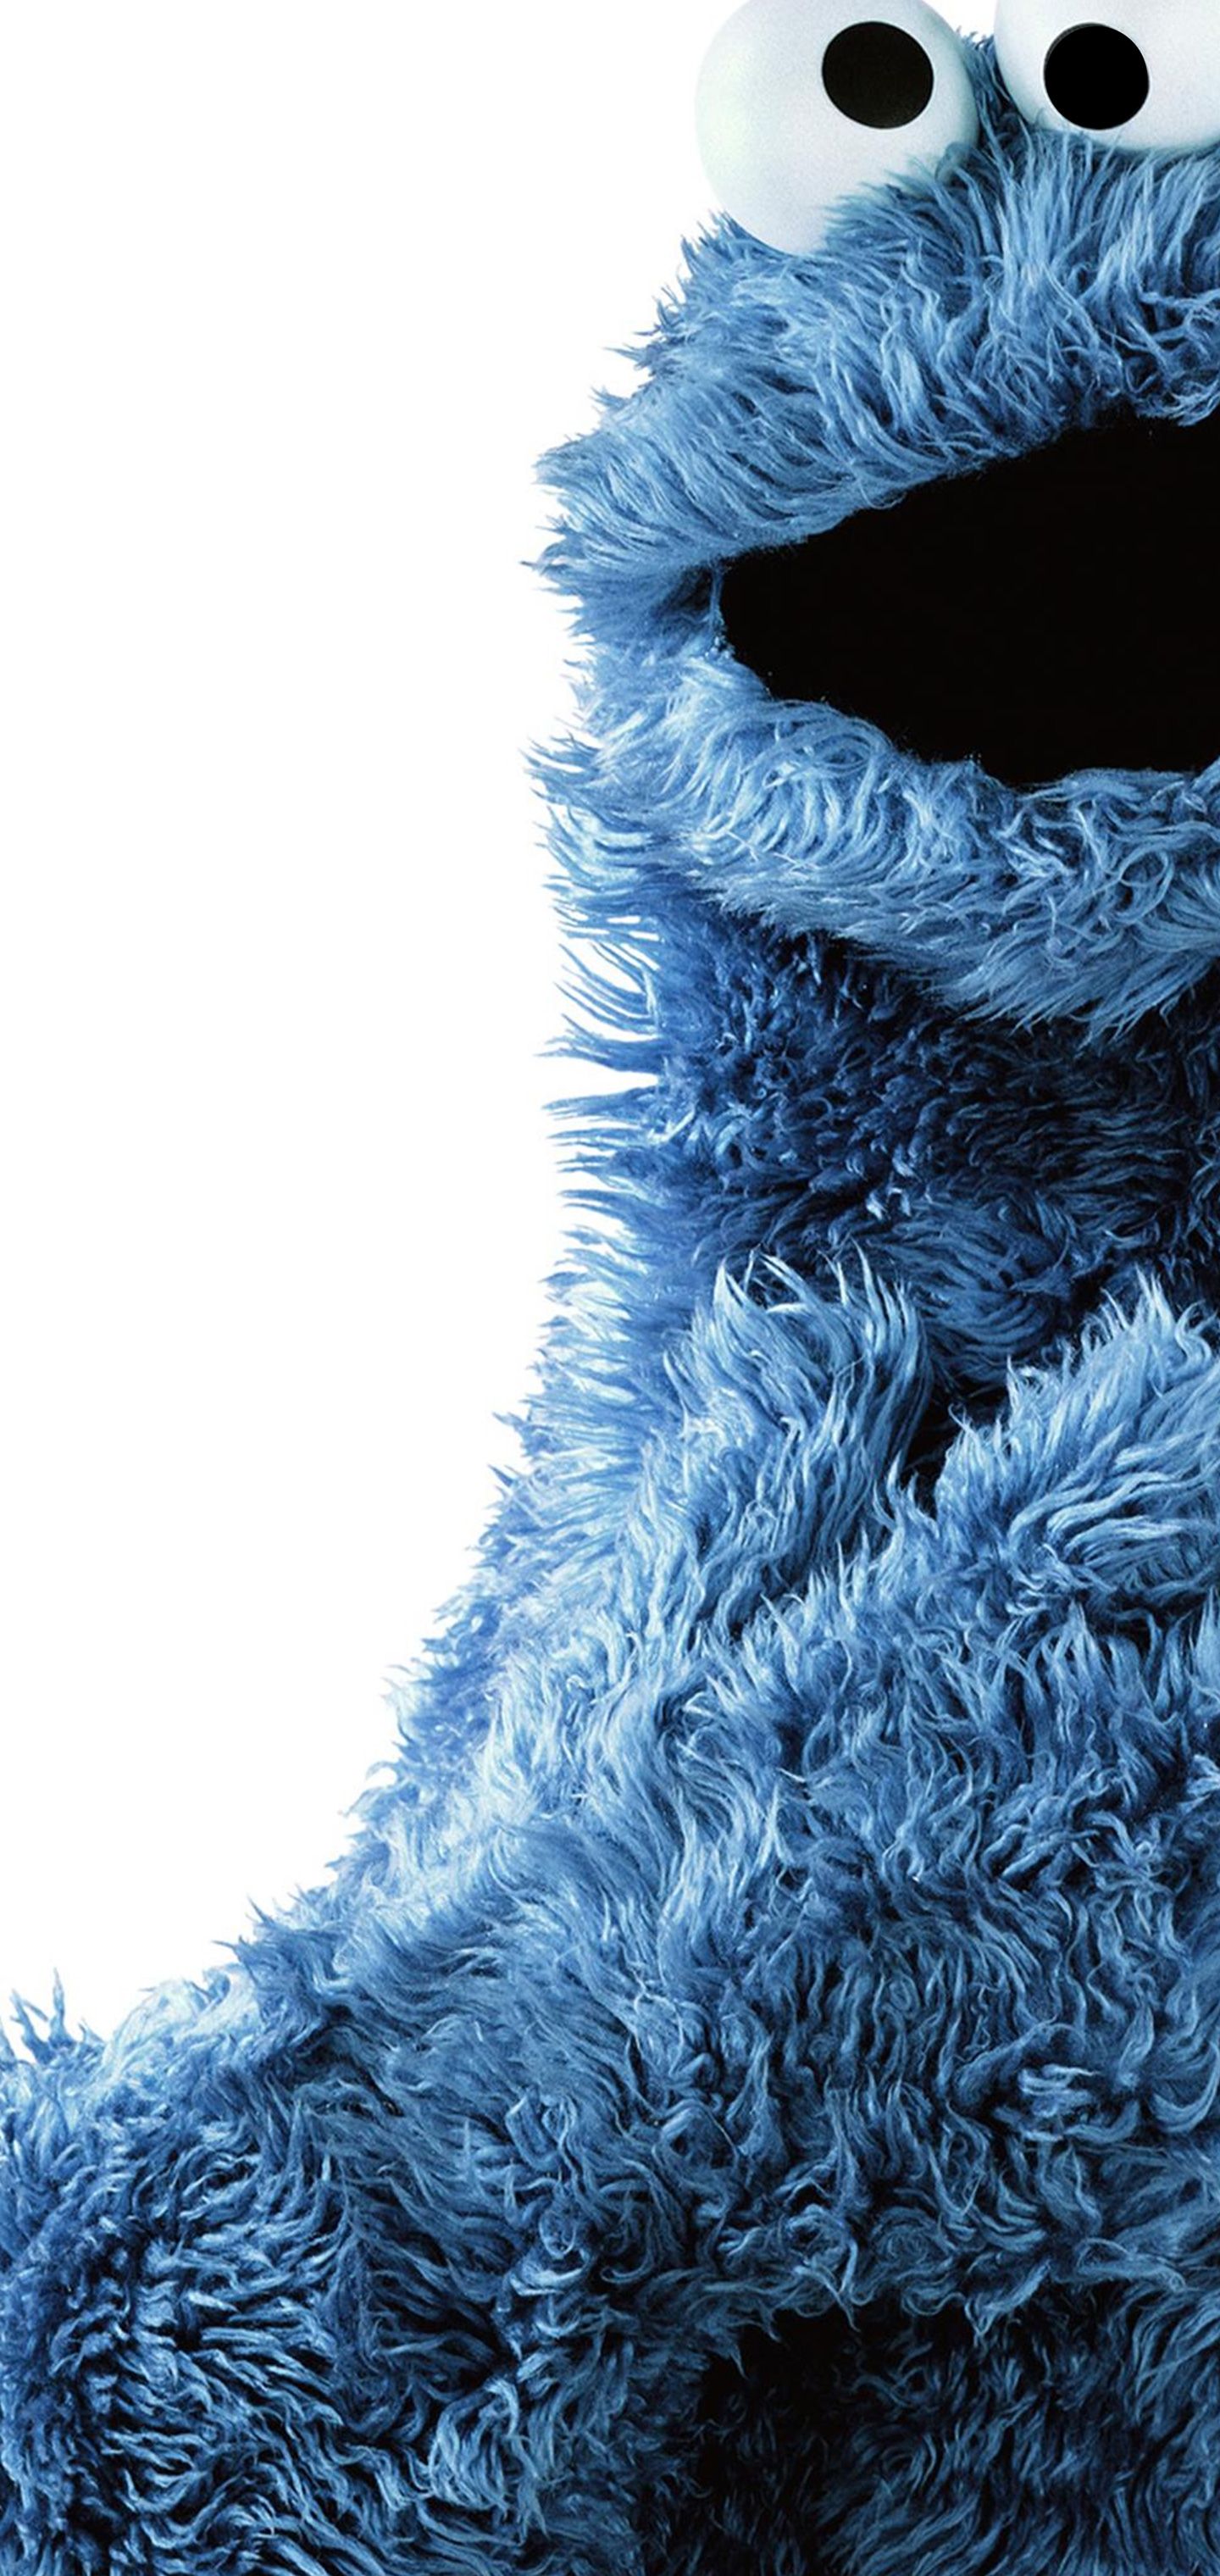 Galaxy S10 And Galaxy S10e Wallpaper Of Cookie Monster - S10 Wallpaper Cookie Monster - HD Wallpaper 